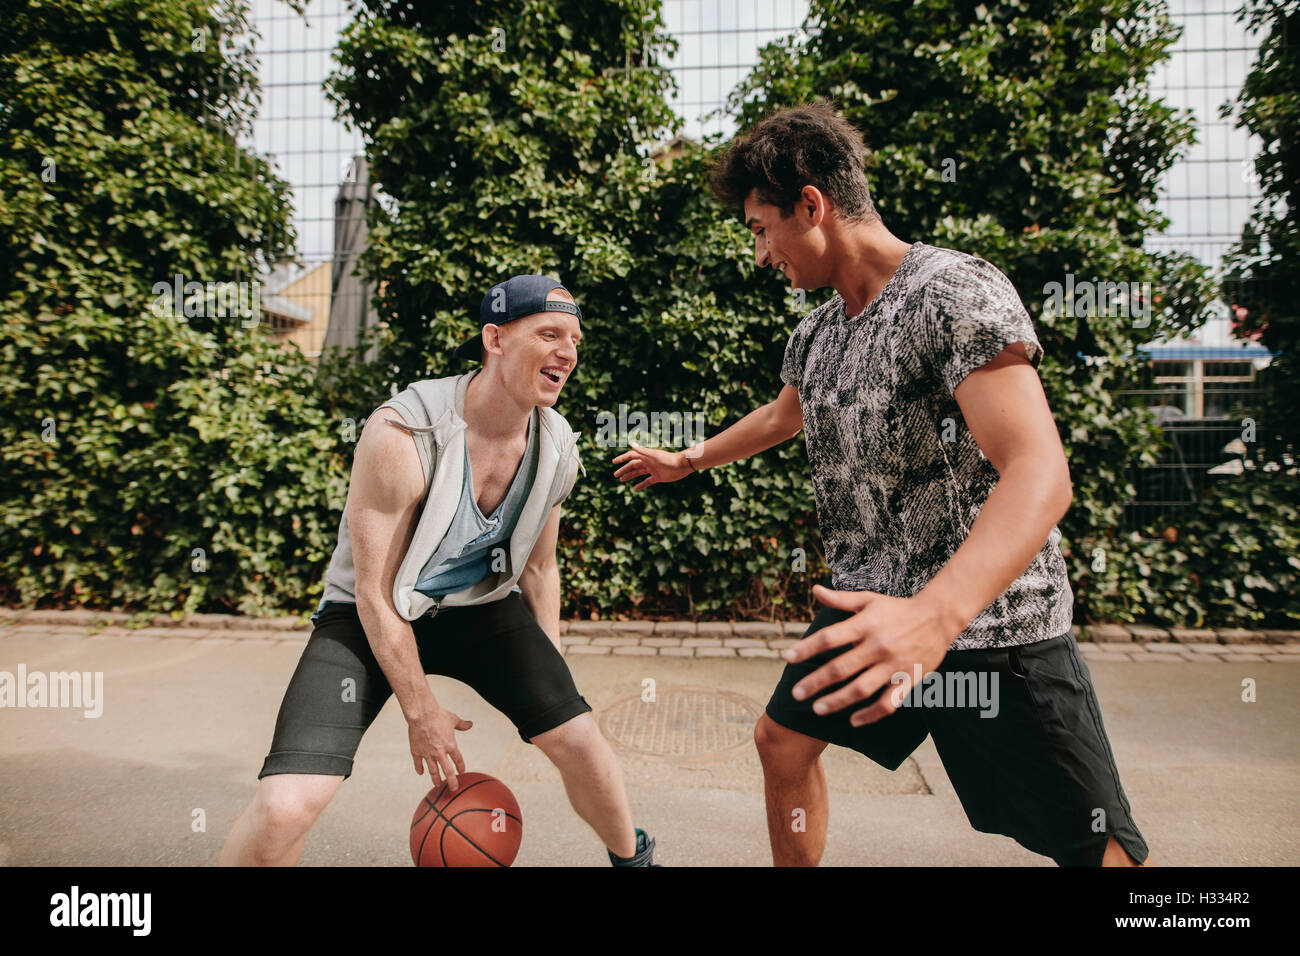 Two young men on basketball court dribbling with ball. Friends playing basketball on court and having fun. Stock Photo